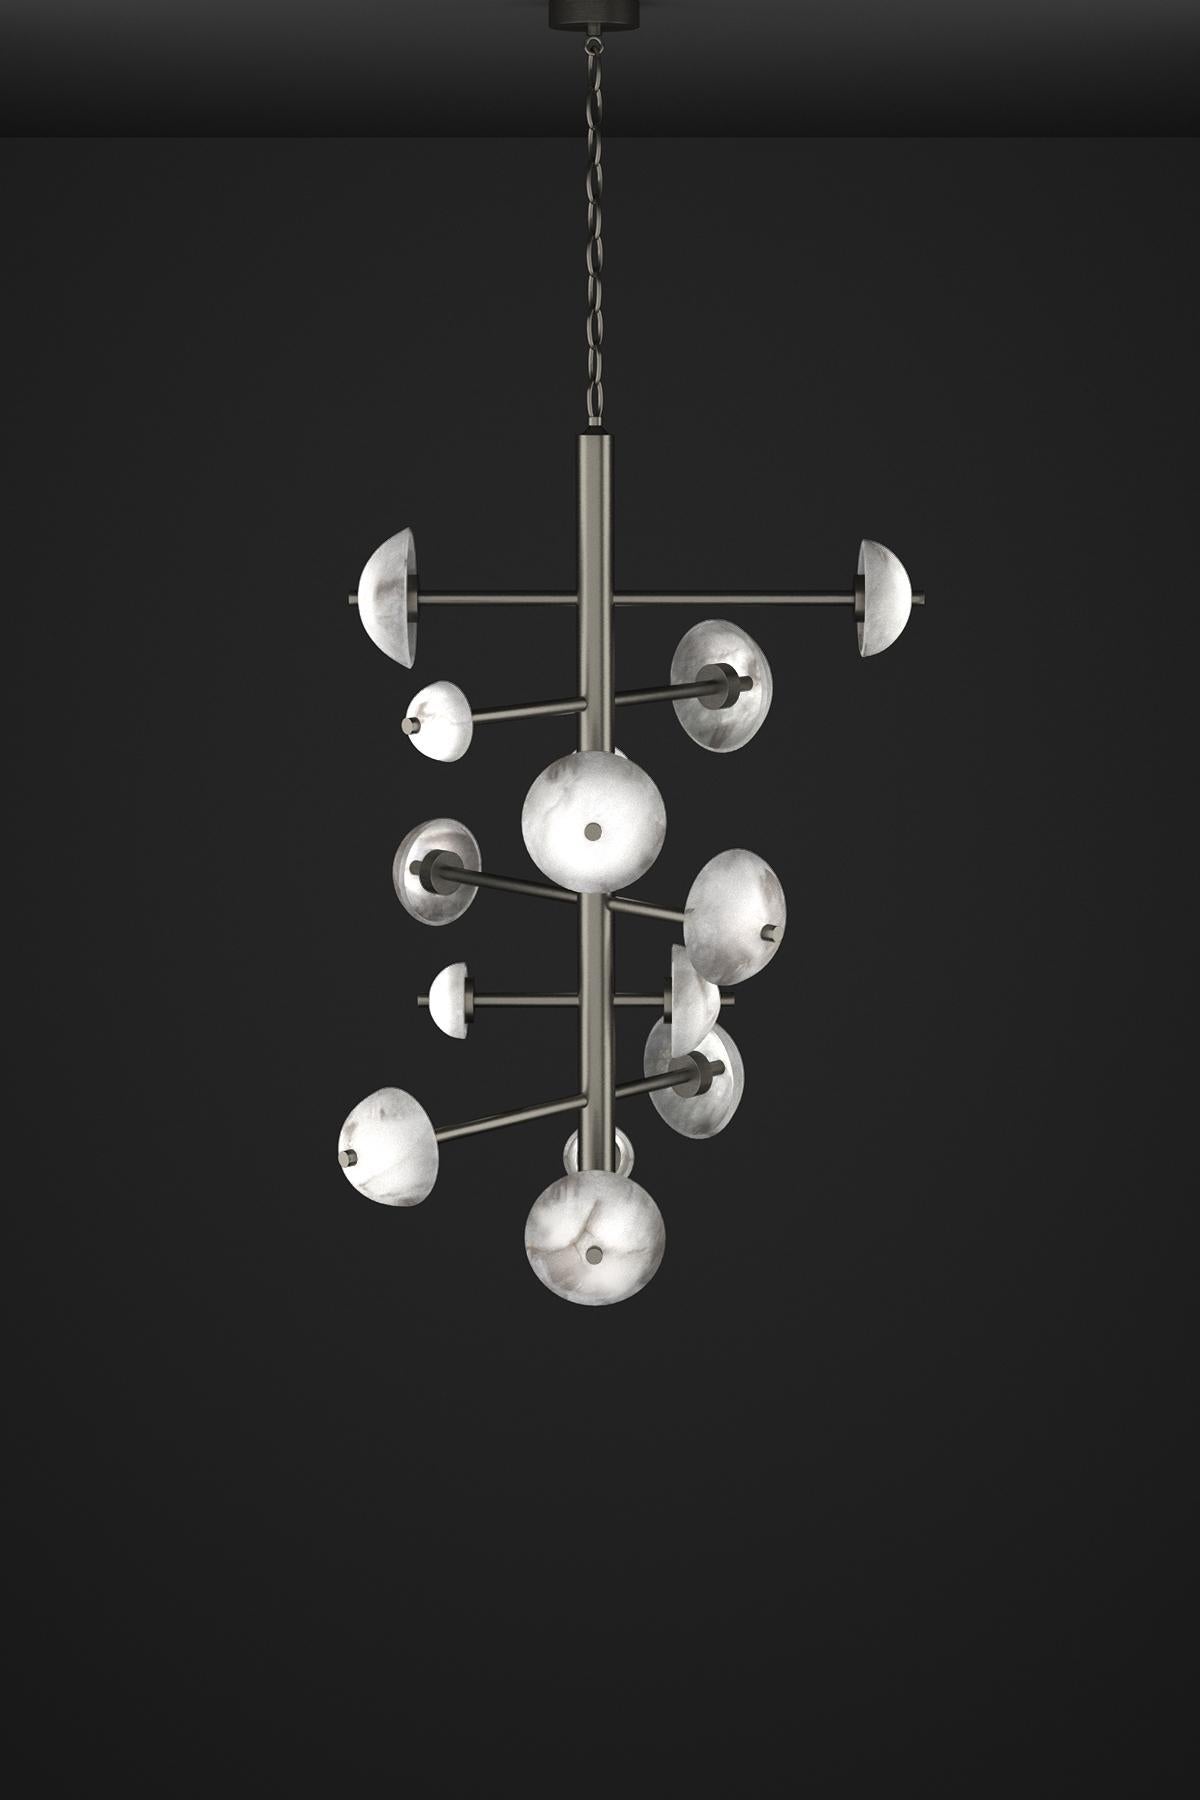 Apollo Brushed Black Metal Chandelier by Alabastro Italiano
Dimensions: D 70,5 x W 55 x H 111 cm.
Materials: White alabaster and metal.

Available in different finishes: Shiny Silver, Bronze, Brushed Brass, Ruggine of Florence, Brushed Burnished,